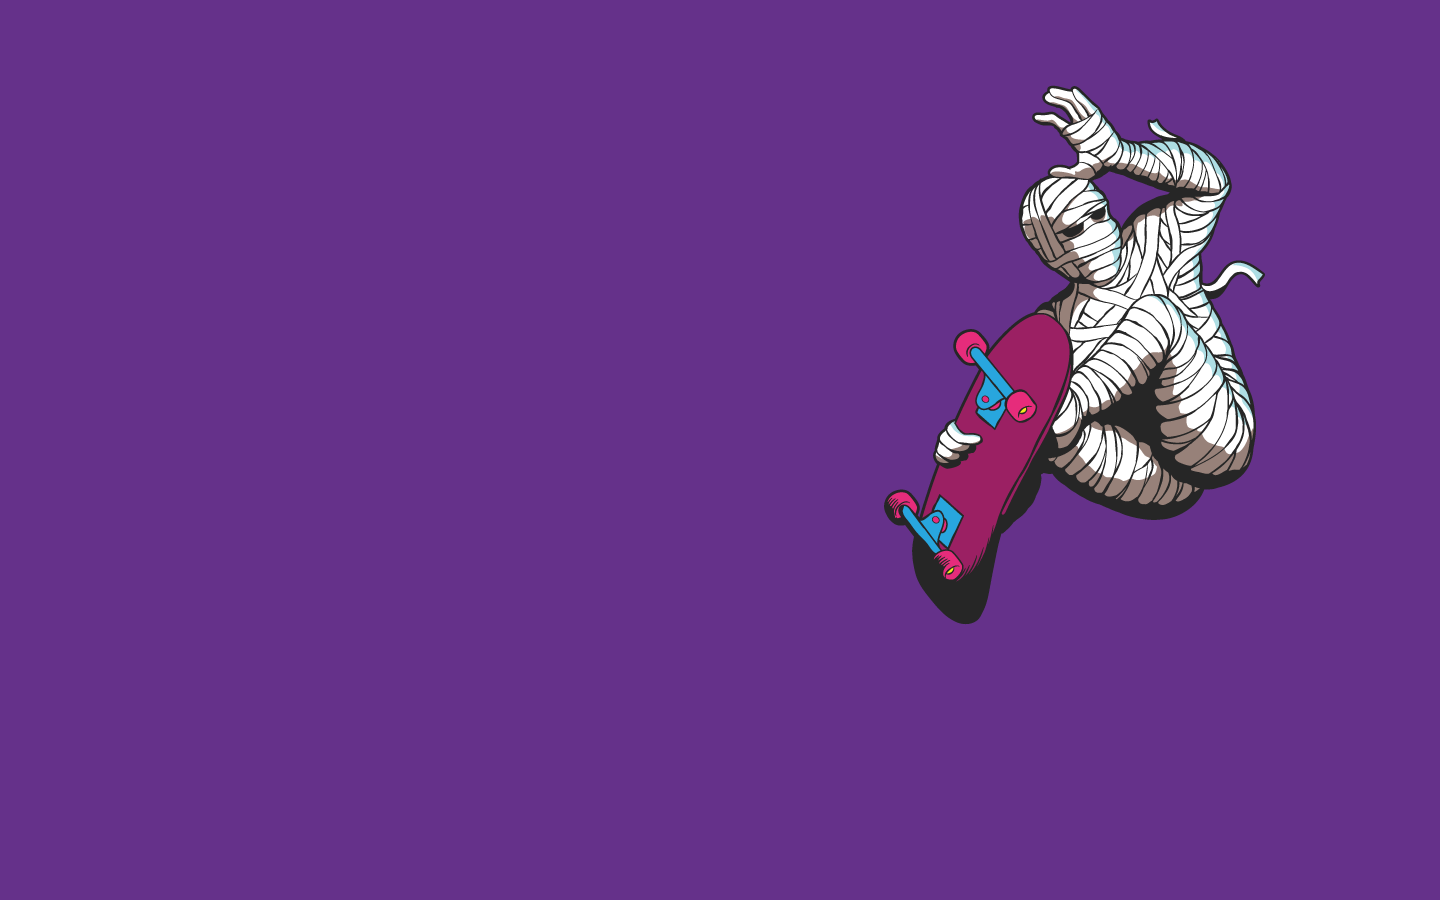 A purple background with an image of spider man on it - Skate